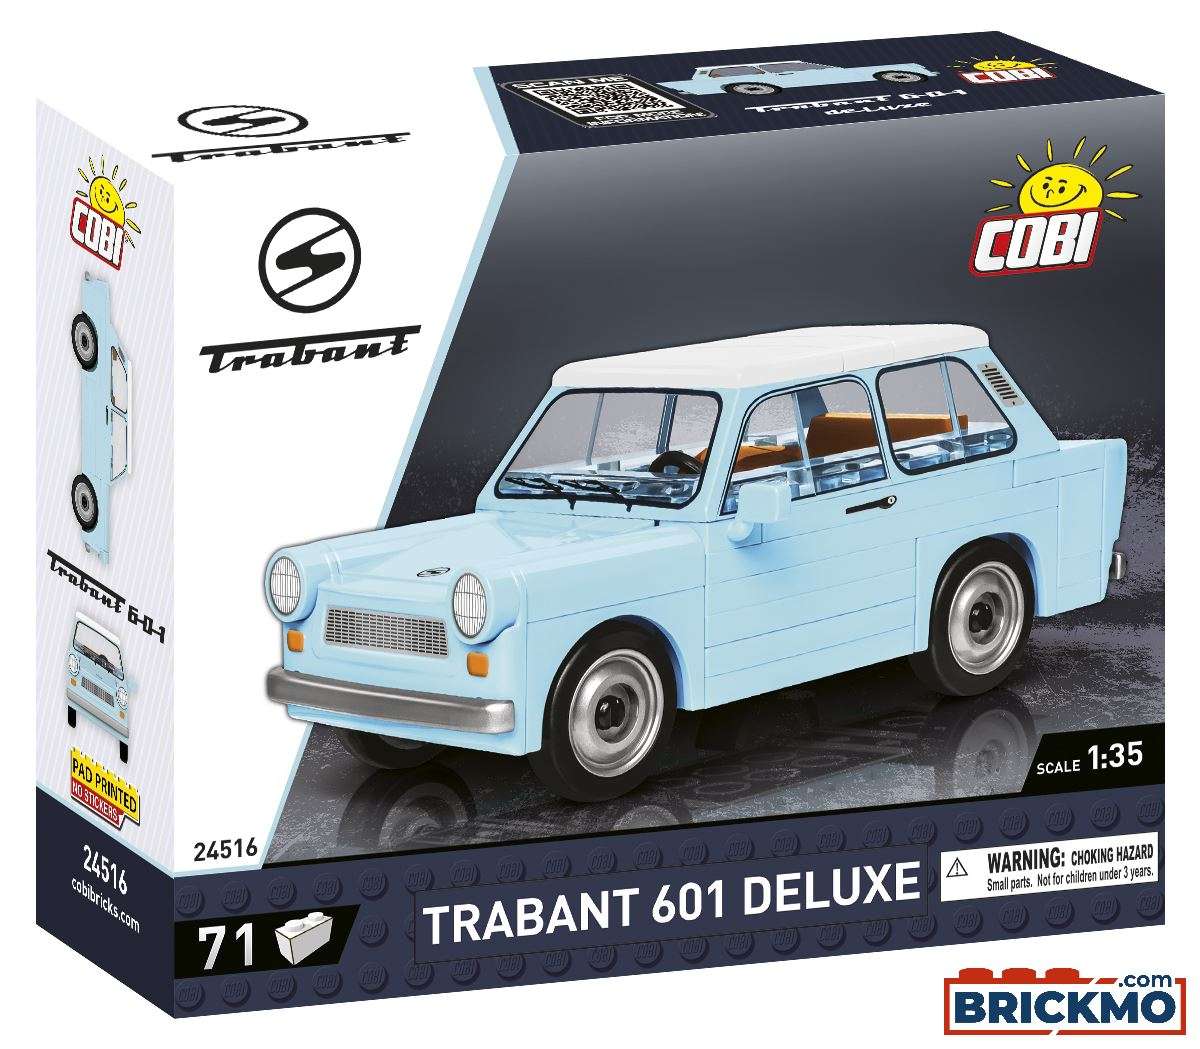 Cobi Youngtimer Trabant 601 Deluxe 24516